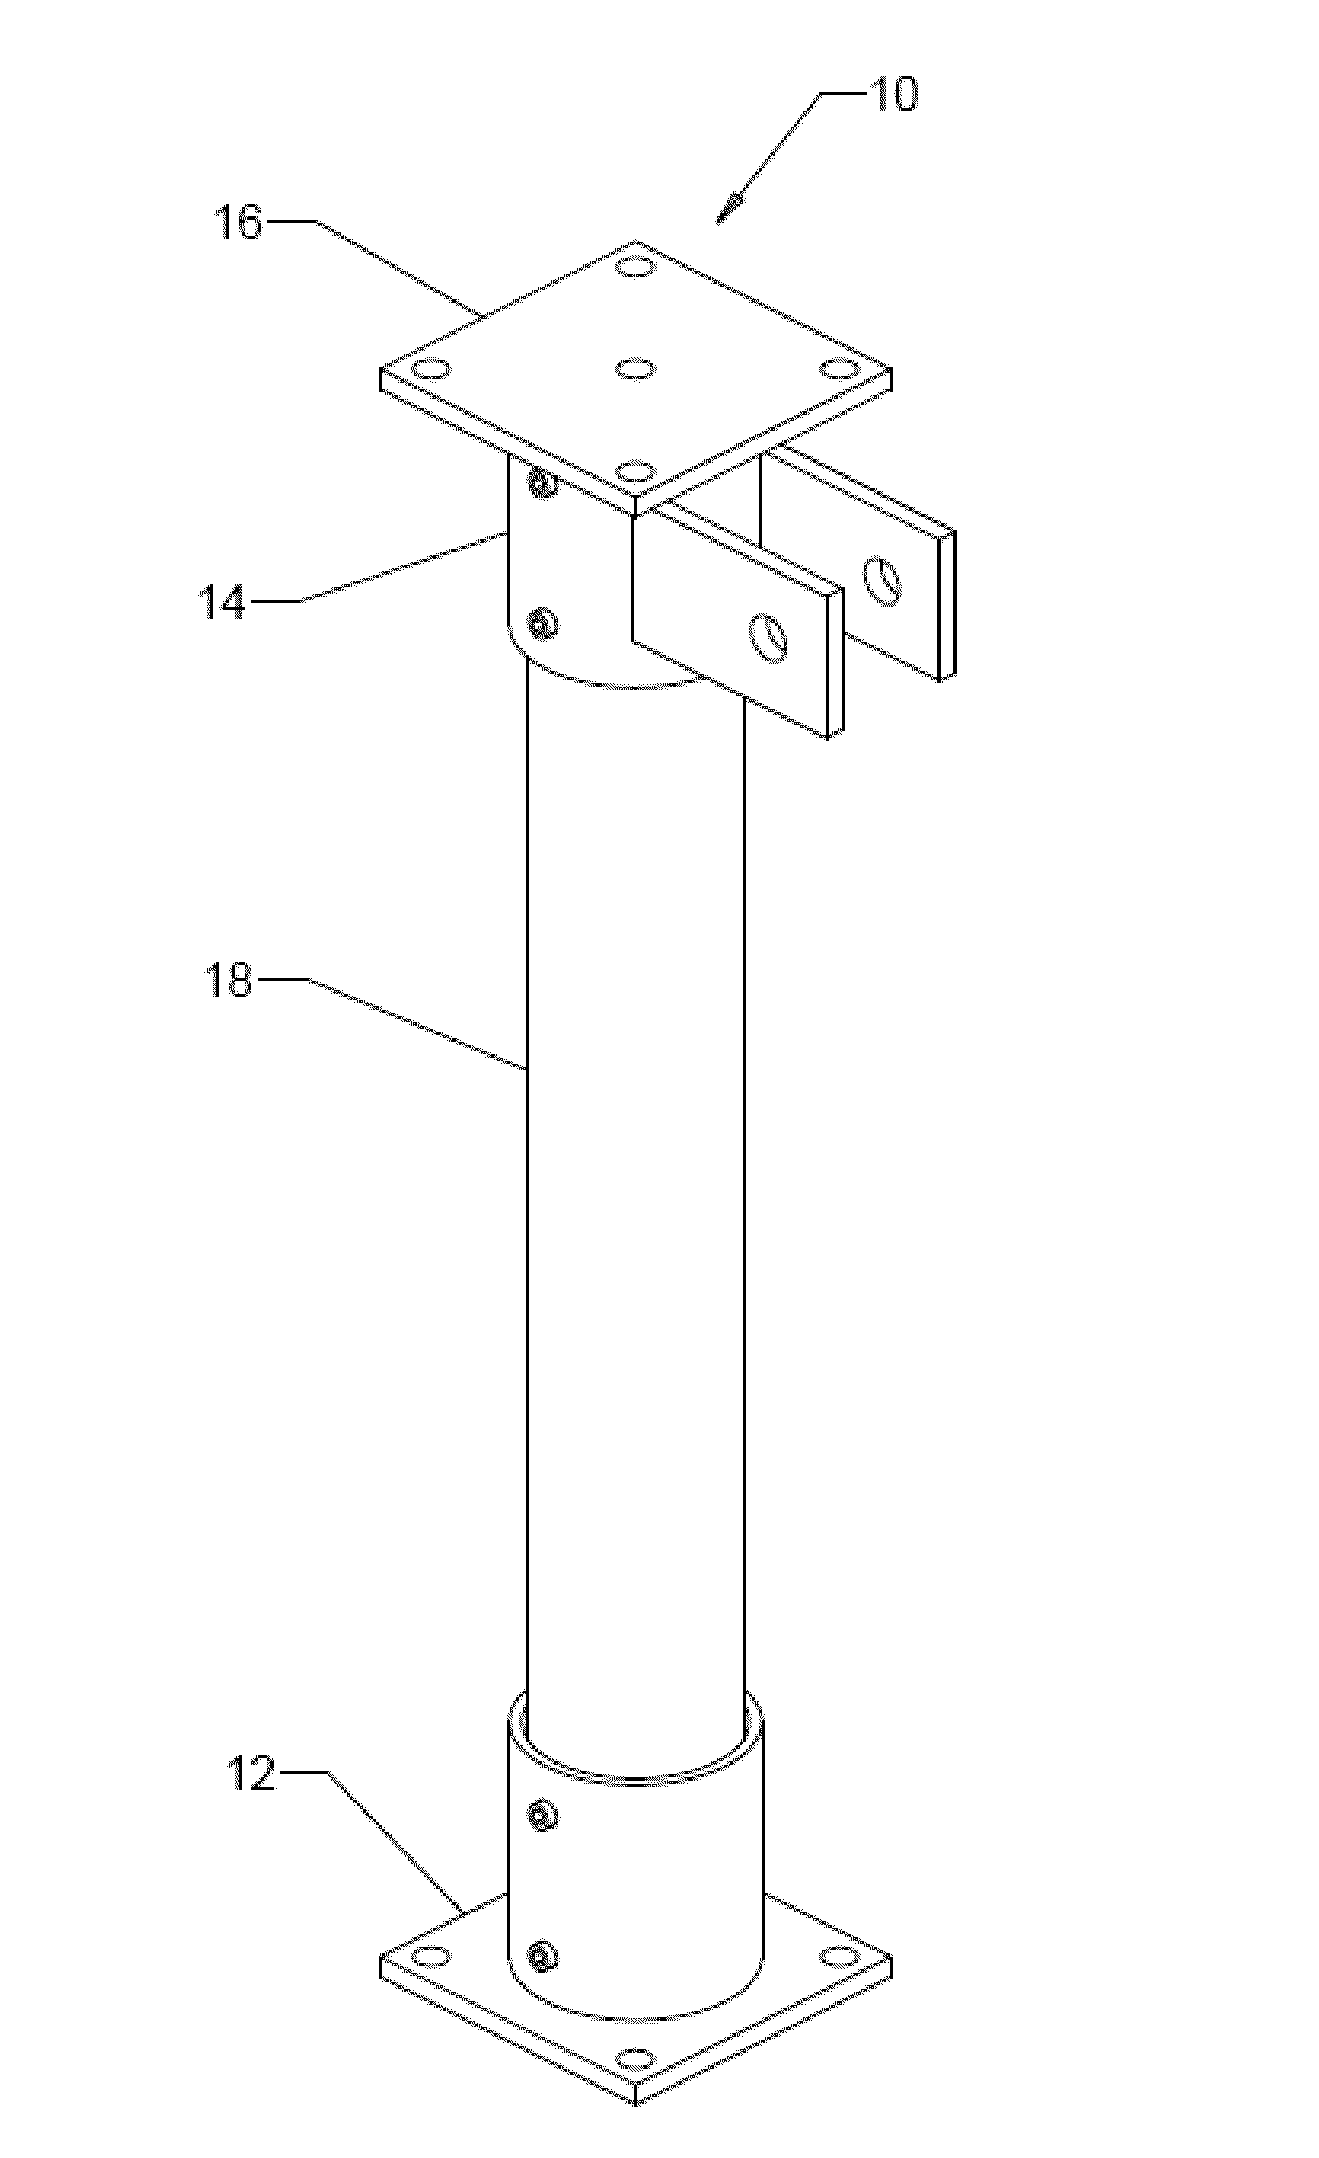 Novel Design For Mounting Assembly For Photovoltaic Arrays